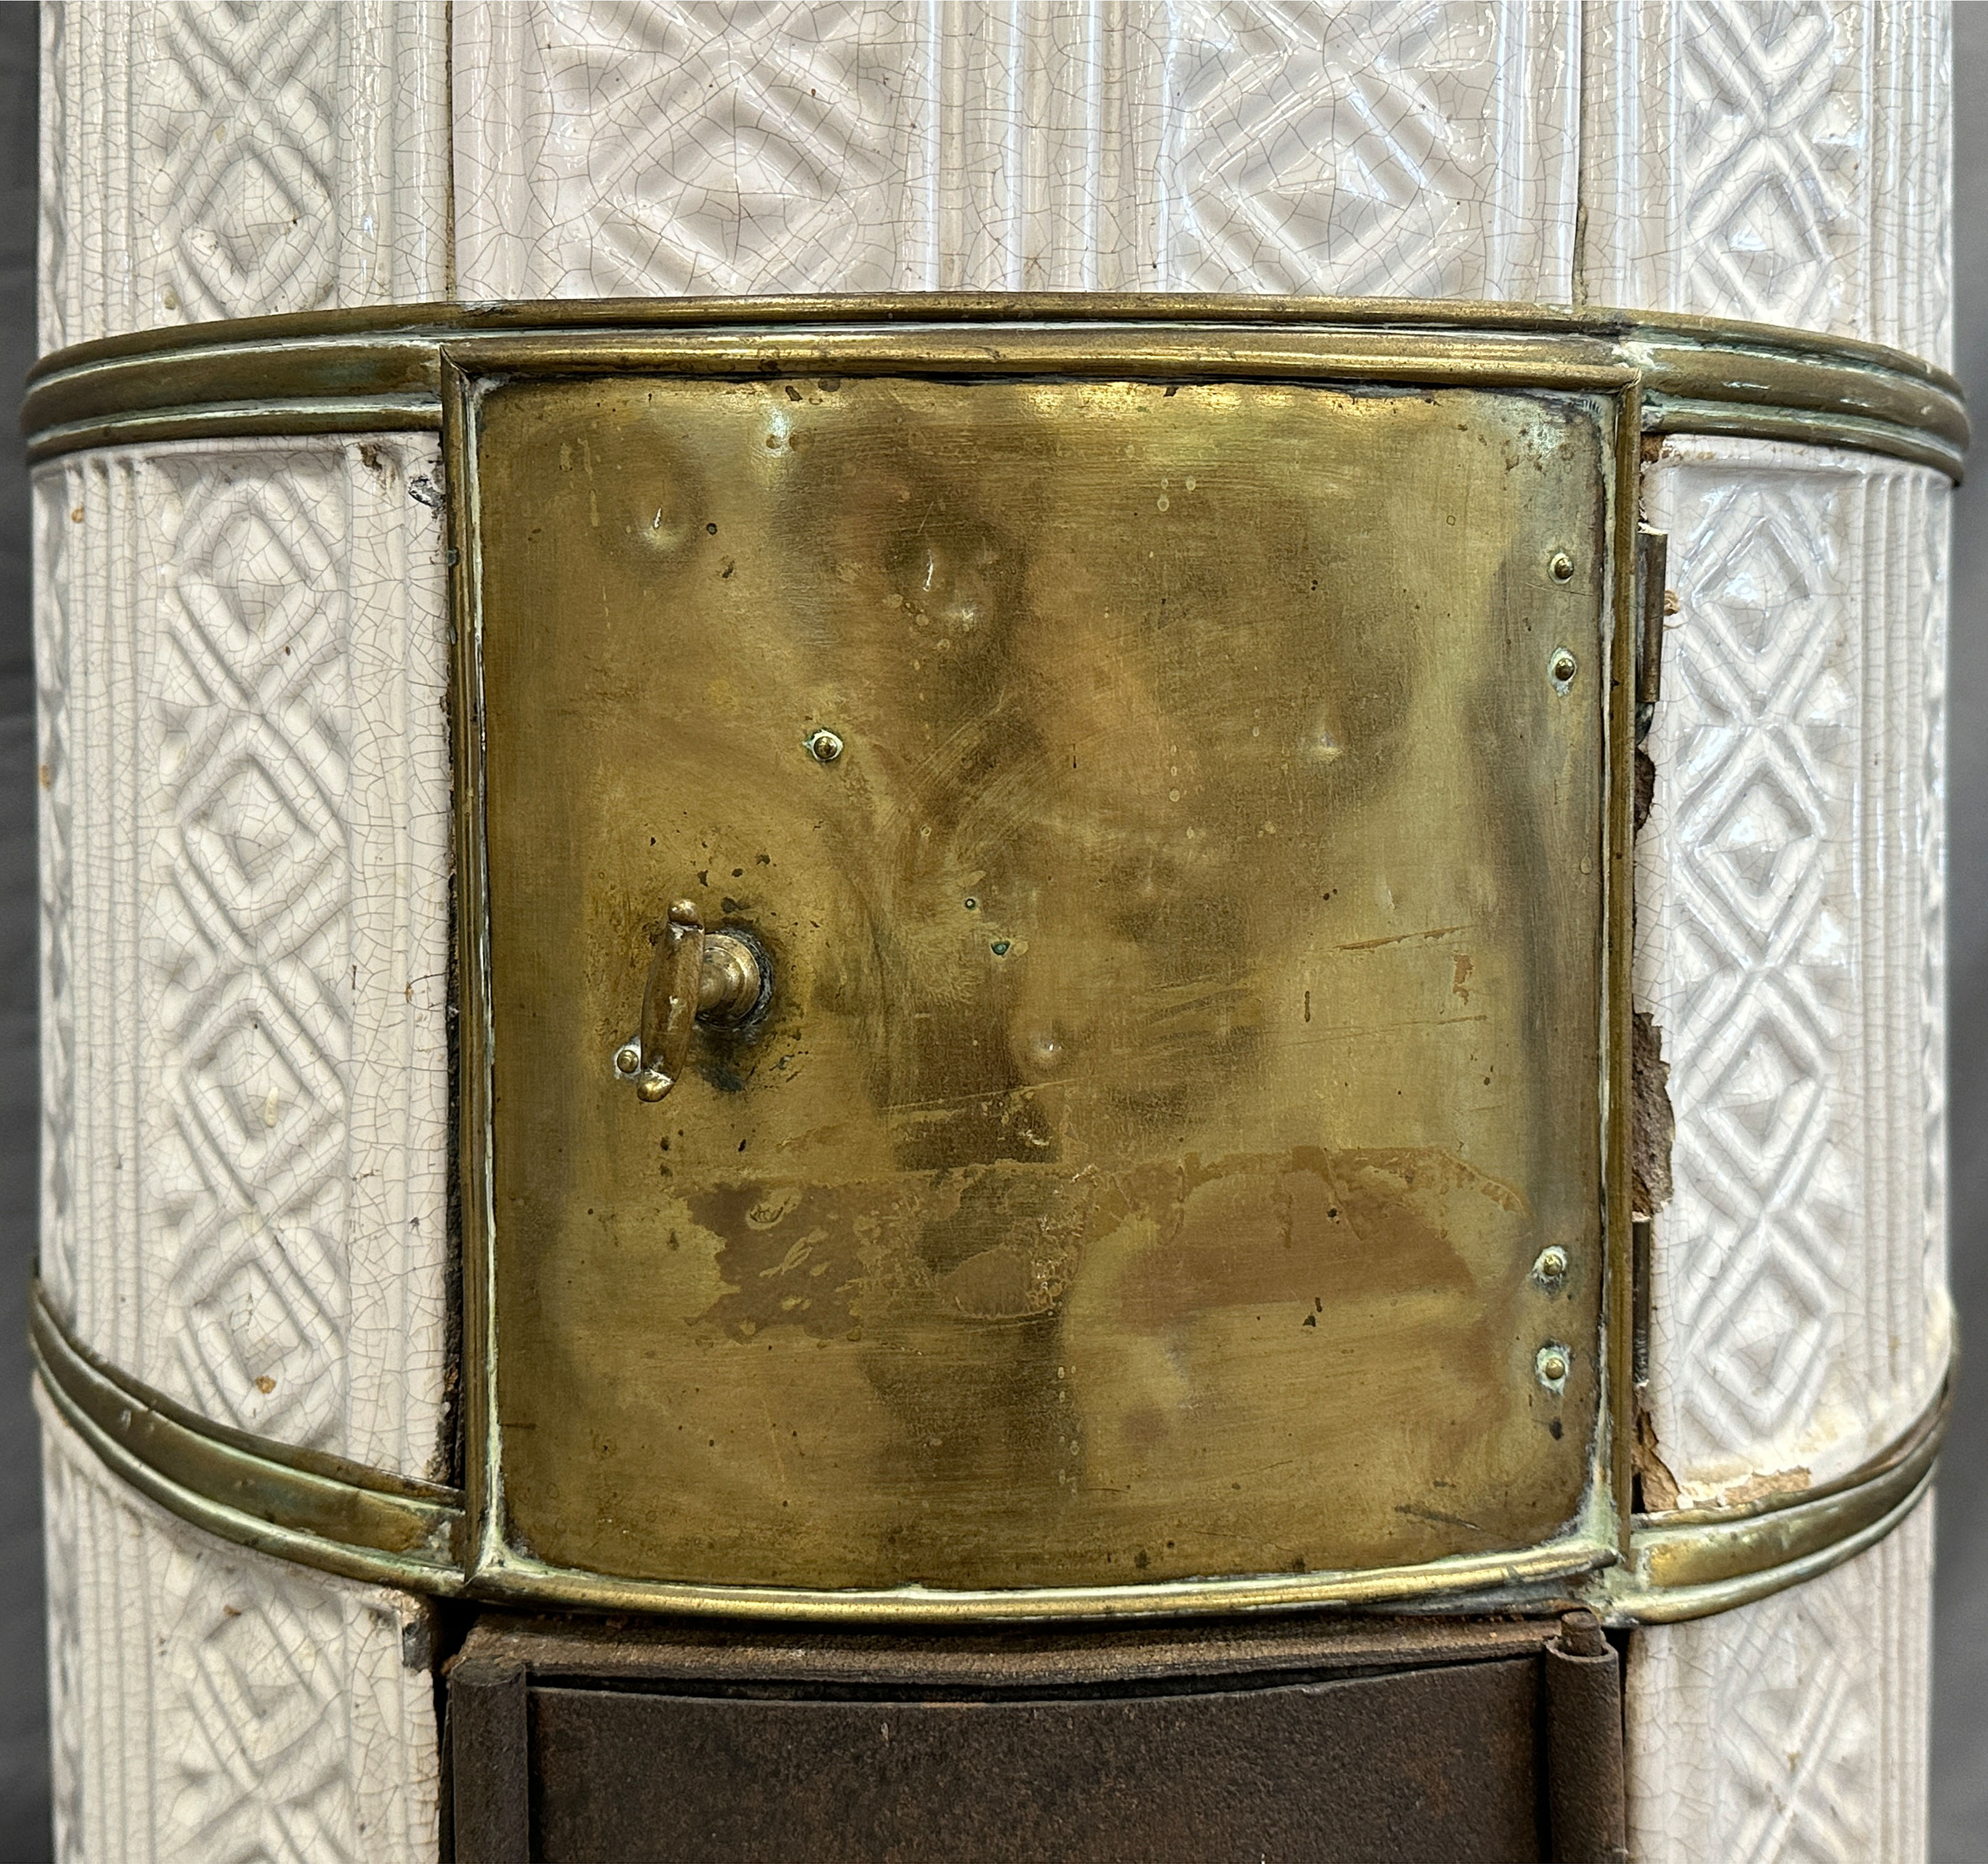 White Biedermeier round stove with tiles in relief structure. - Image 8 of 19